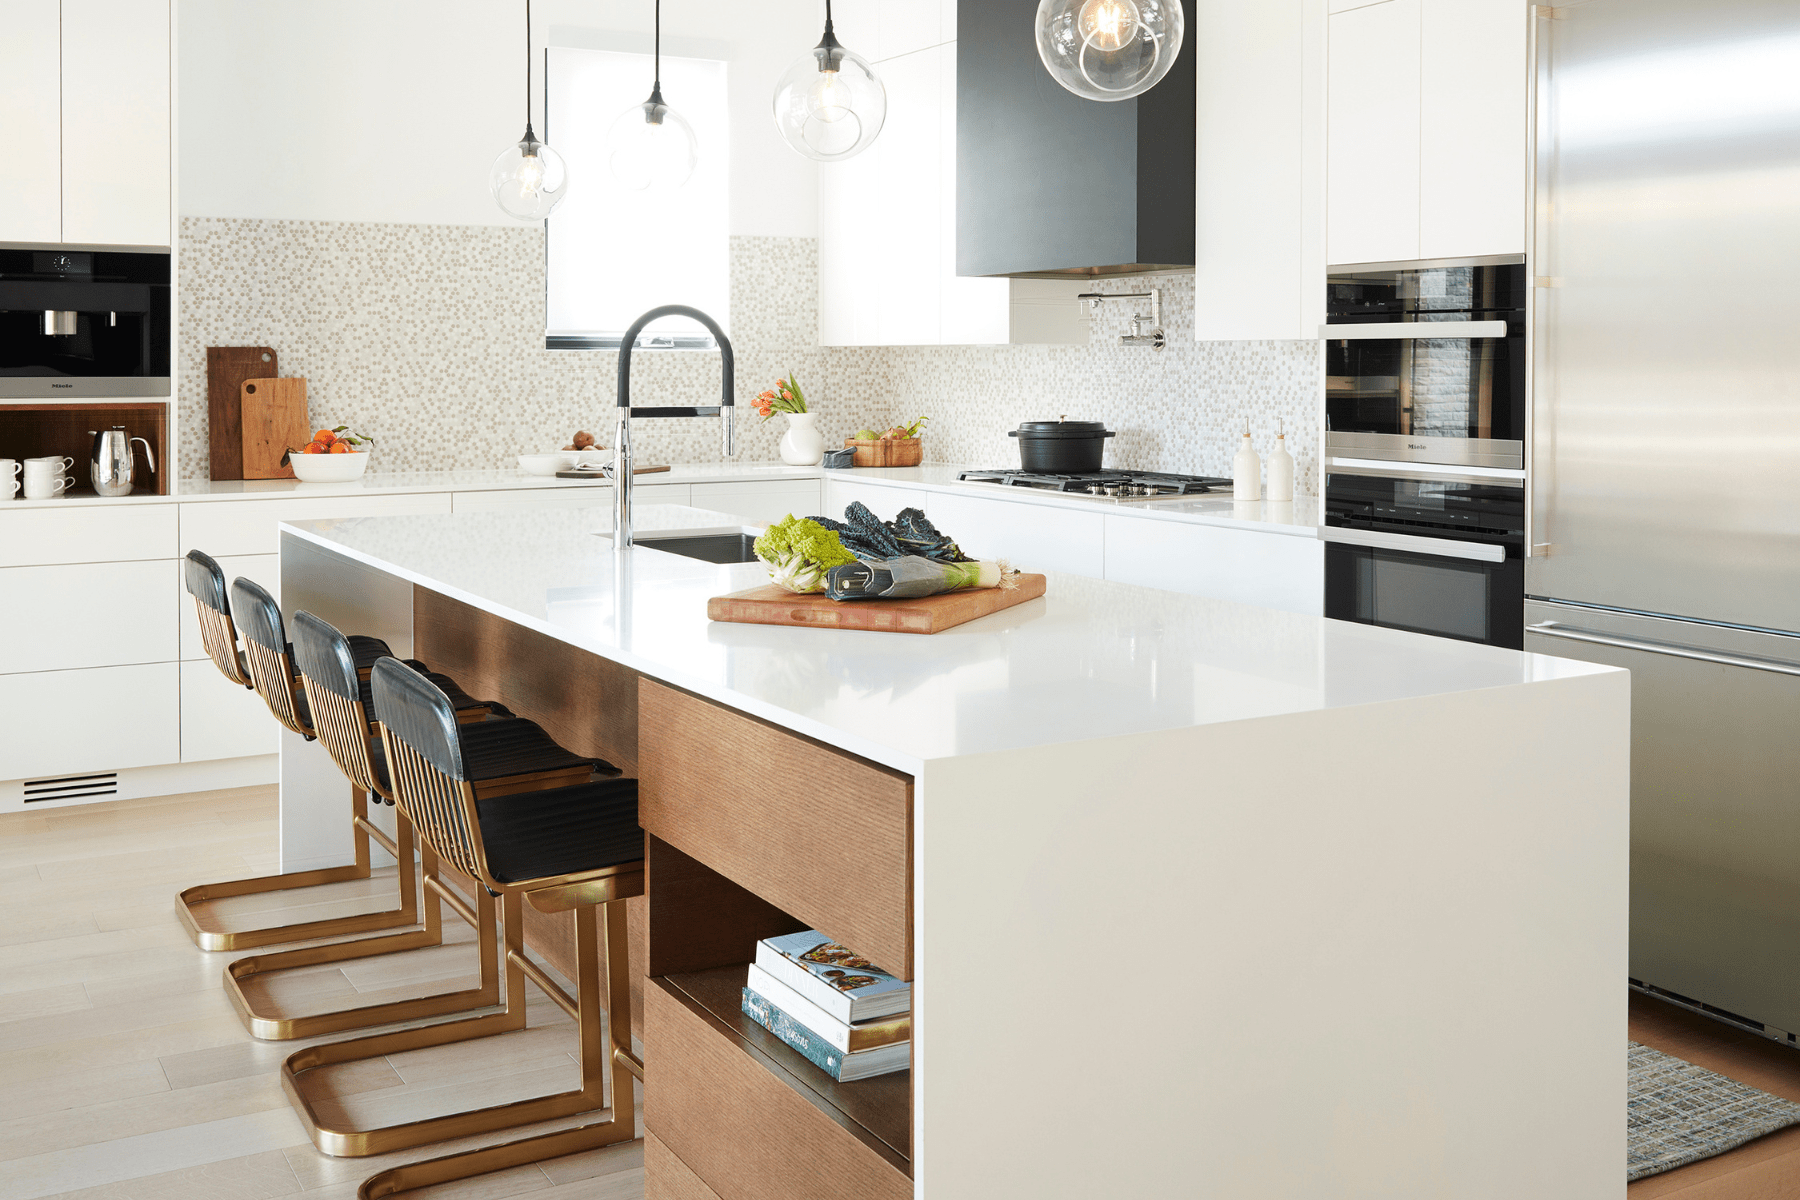 Bright modern chicken with white waterfall countertop and black accents